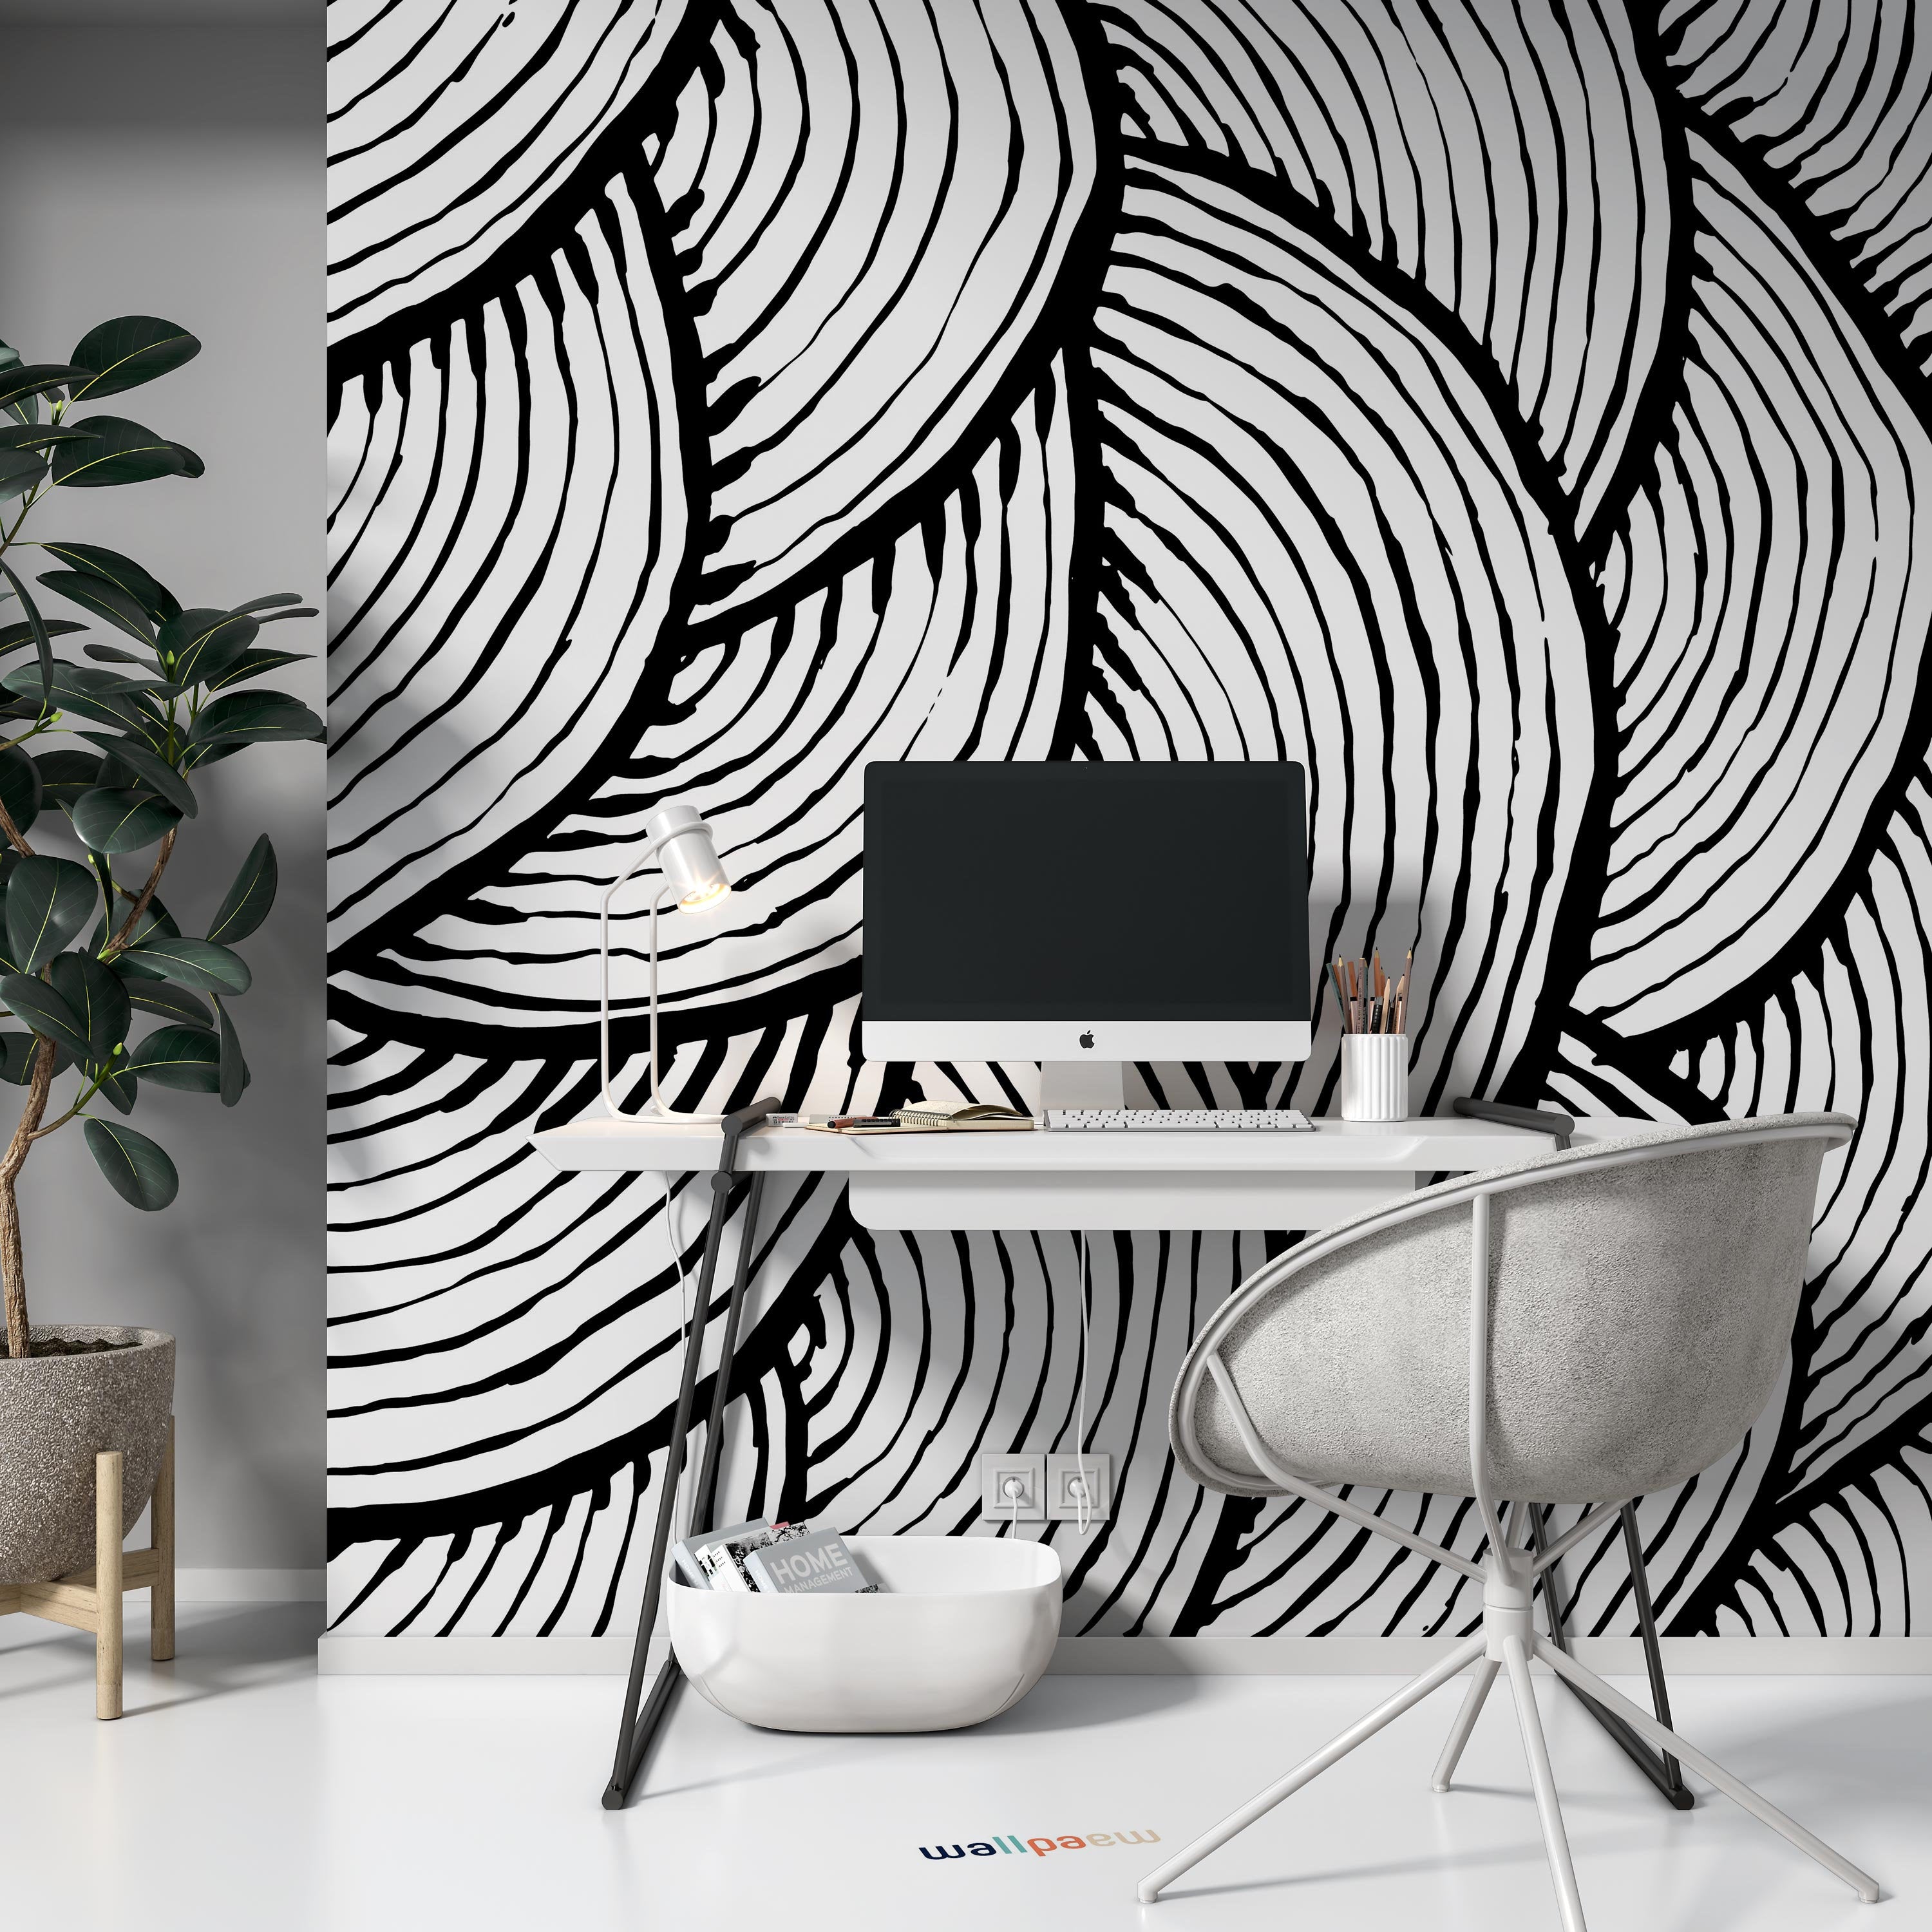 Brush Stroke Pattern Black and White Watercolor Abstract Wallpaper Cafe Restaurant Decoration Living Room Bedroom Mural Home Decor Wall Art